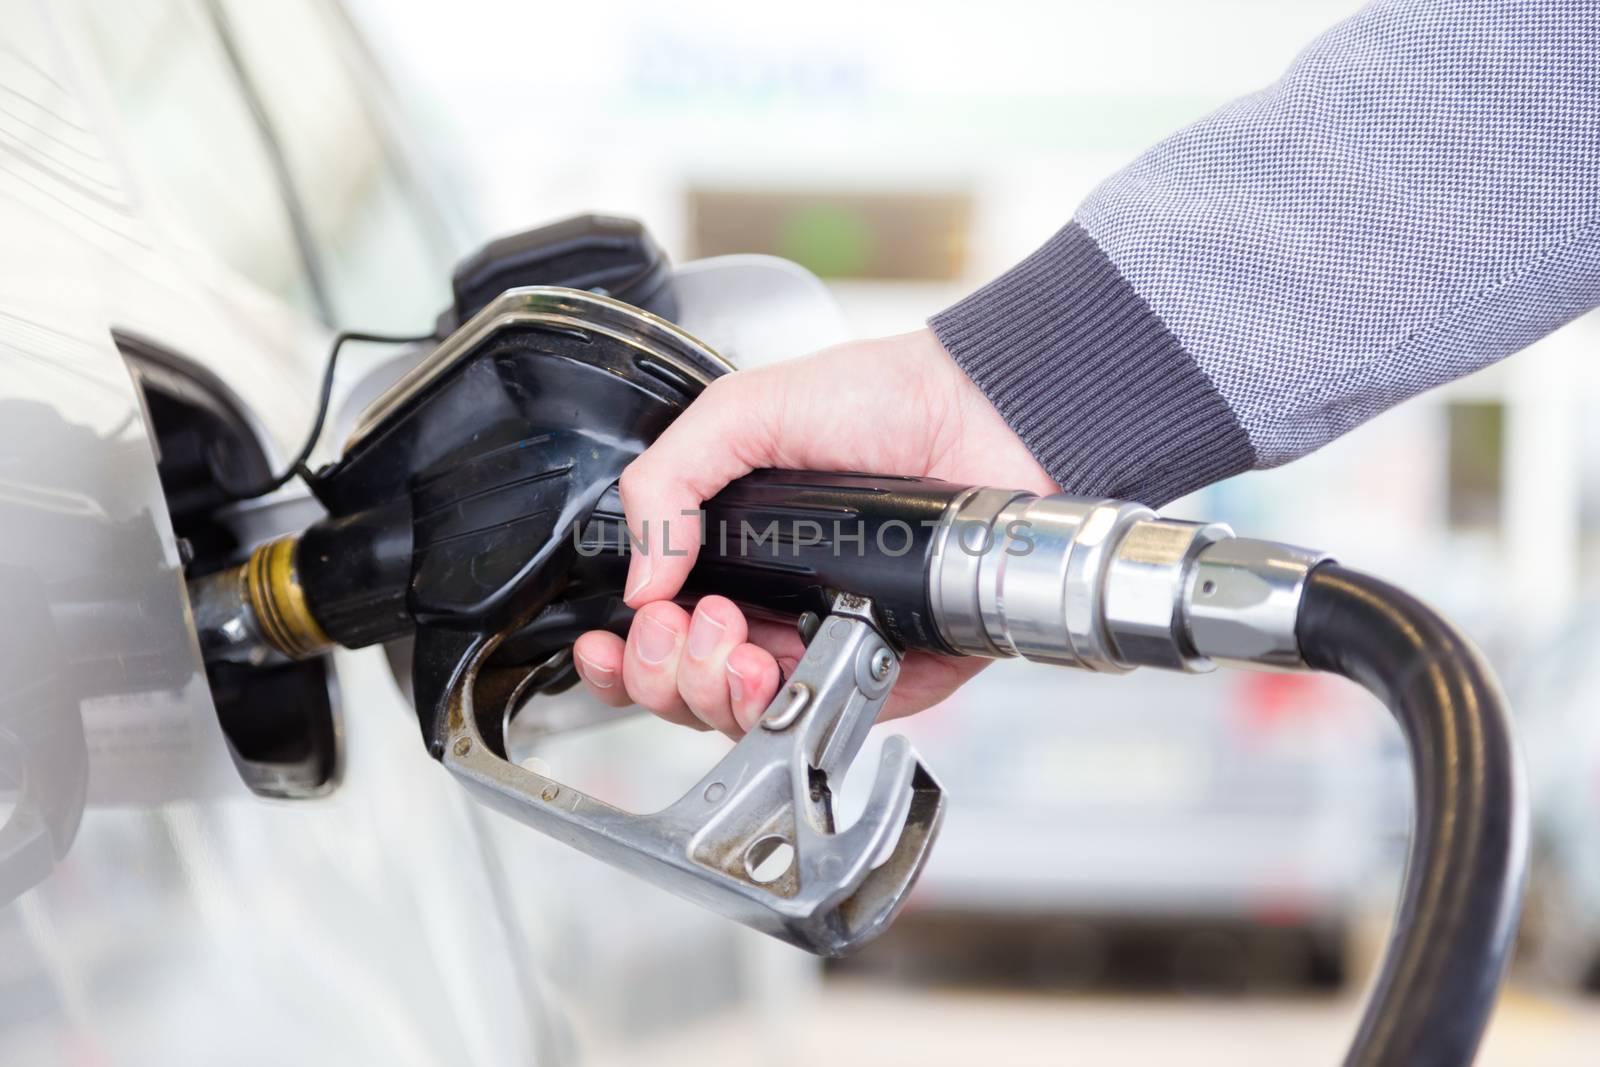 Petrol or gasoline being pumped into a motor vehicle car. Closeup of man pumping gasoline fuel in car at gas station.